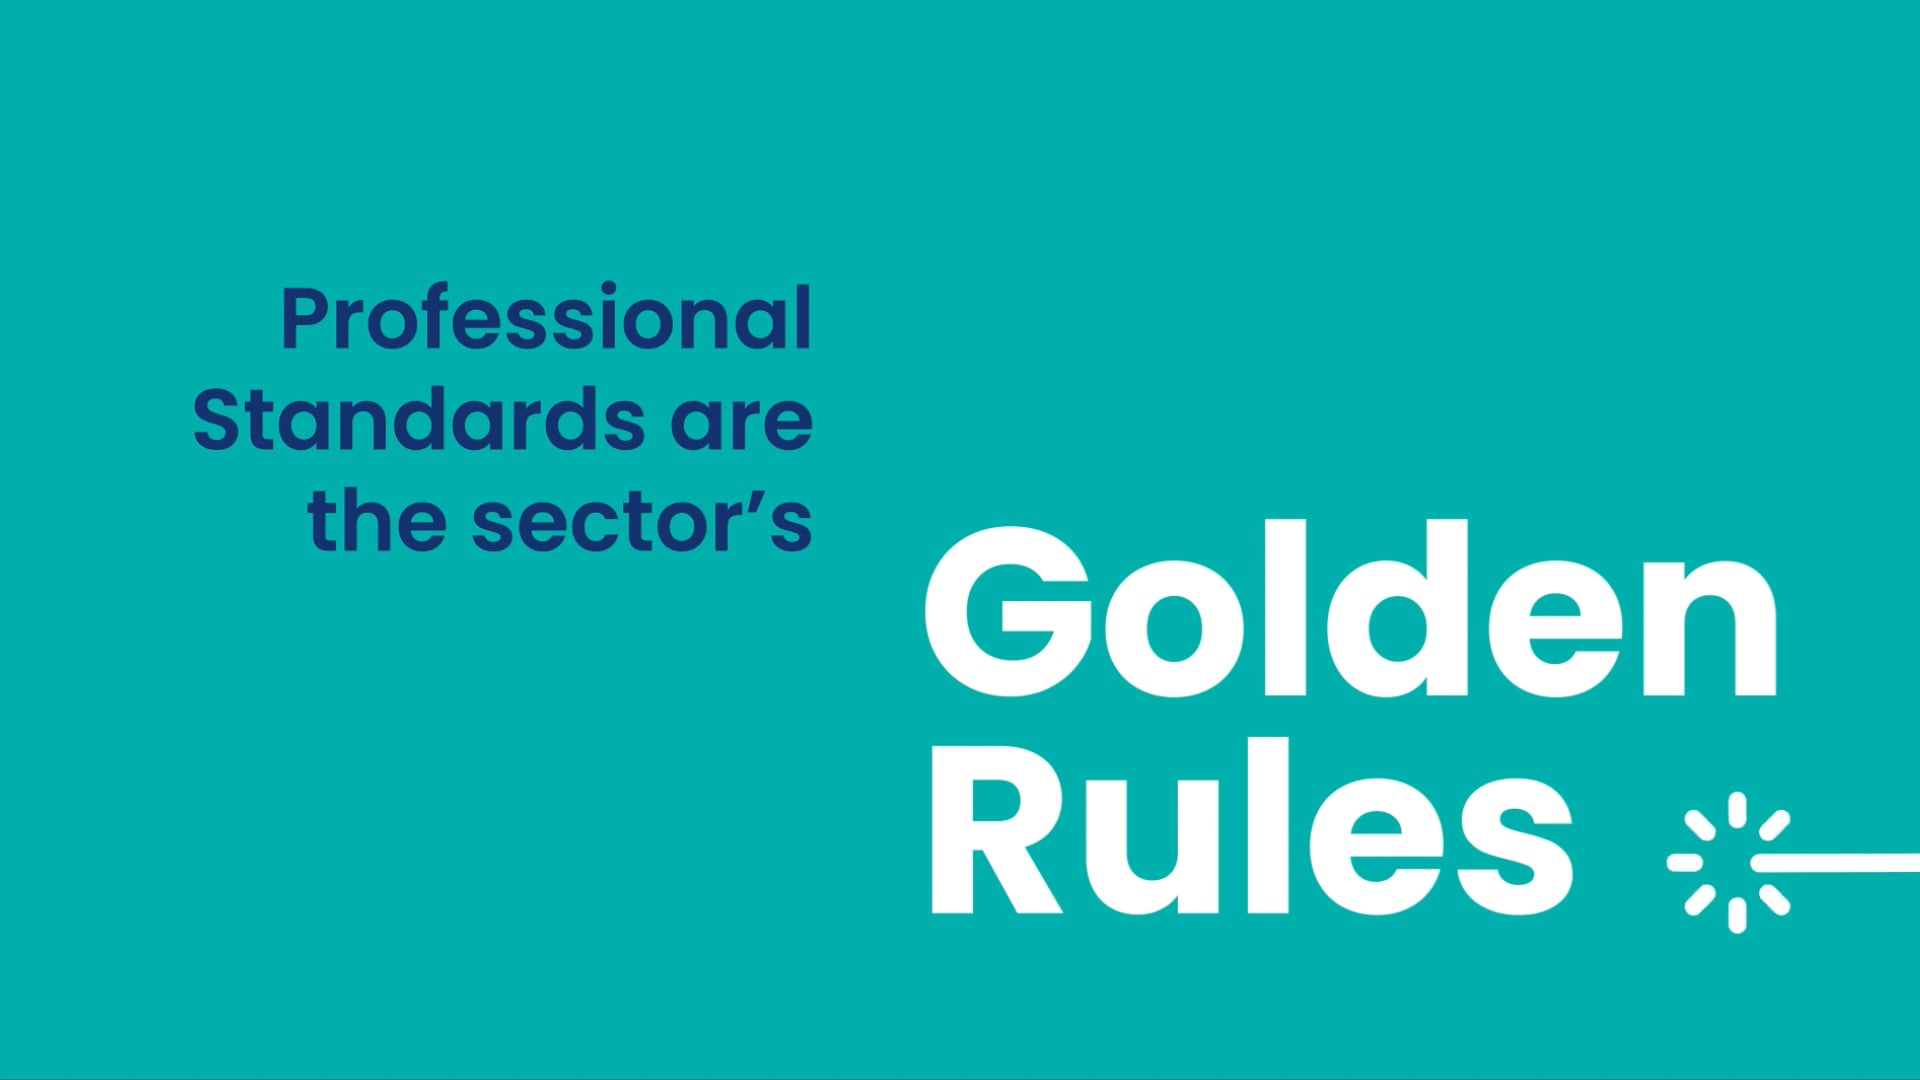 Professional standards are the sector's Golden Rules